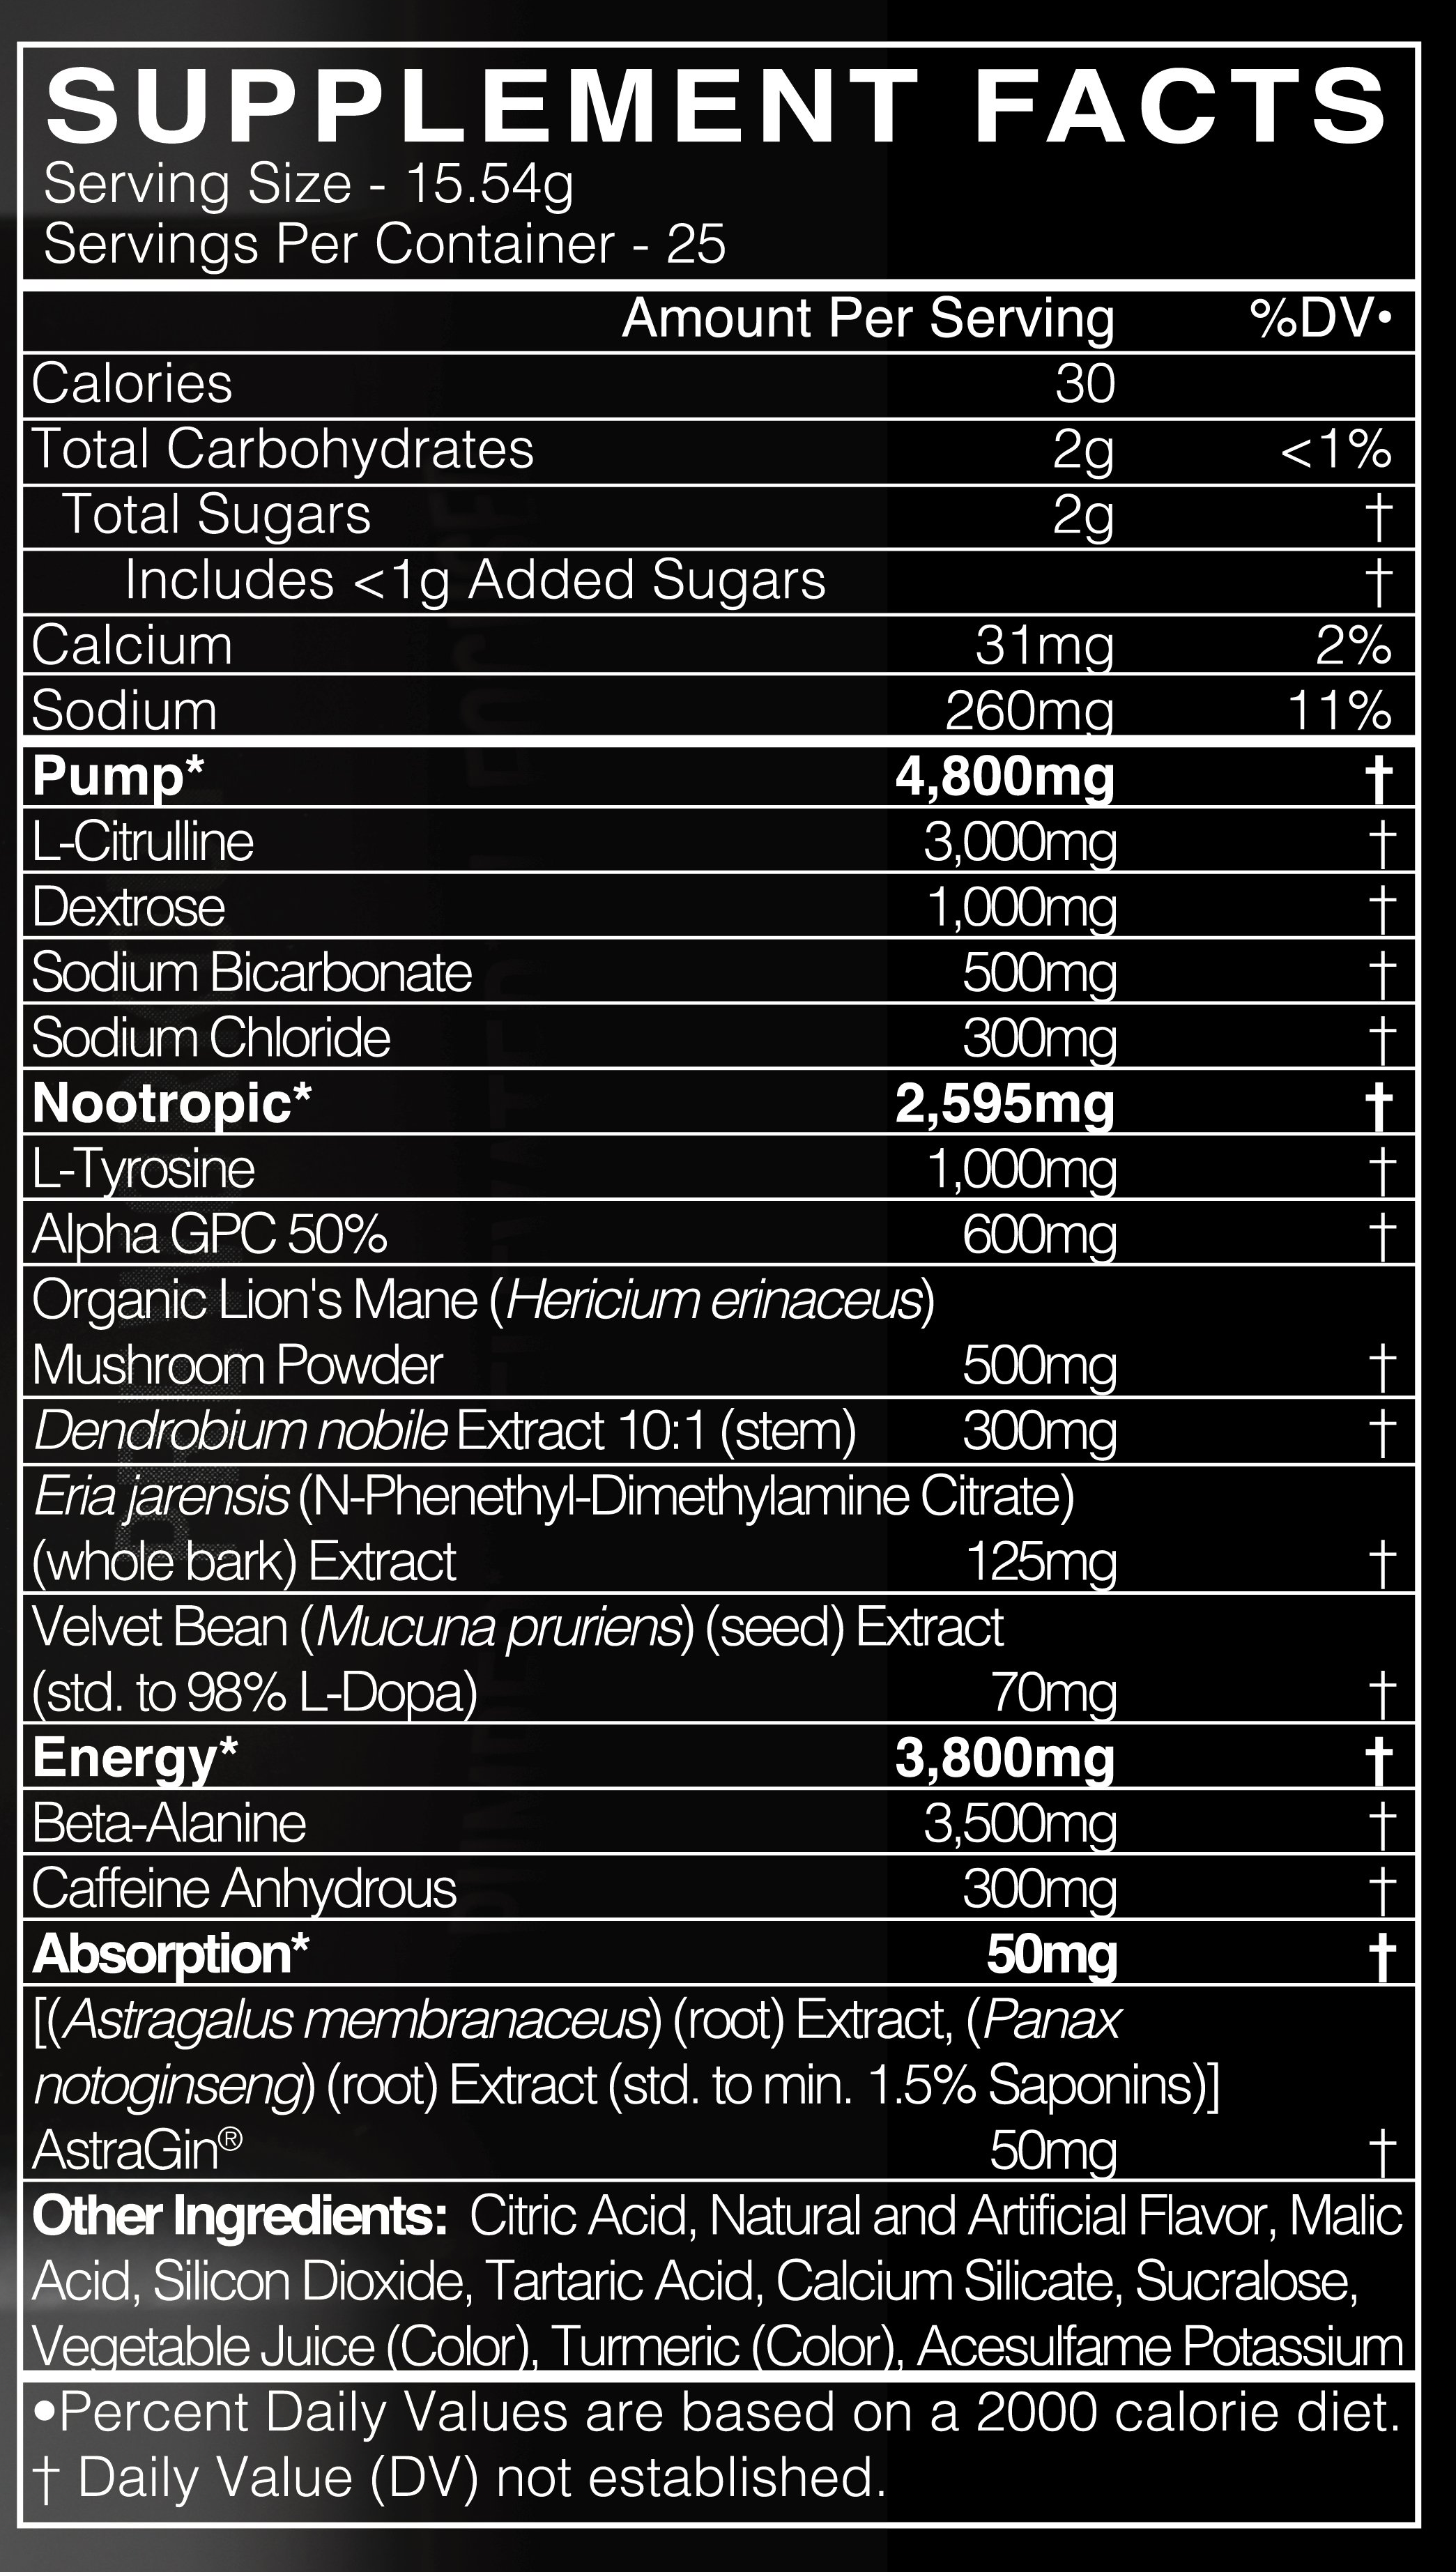 Supplement facts showing serving size, calories, components with their specific amounts including L-Citrulline, Sodium Bicarbonate, L-Tyrosine, and more.